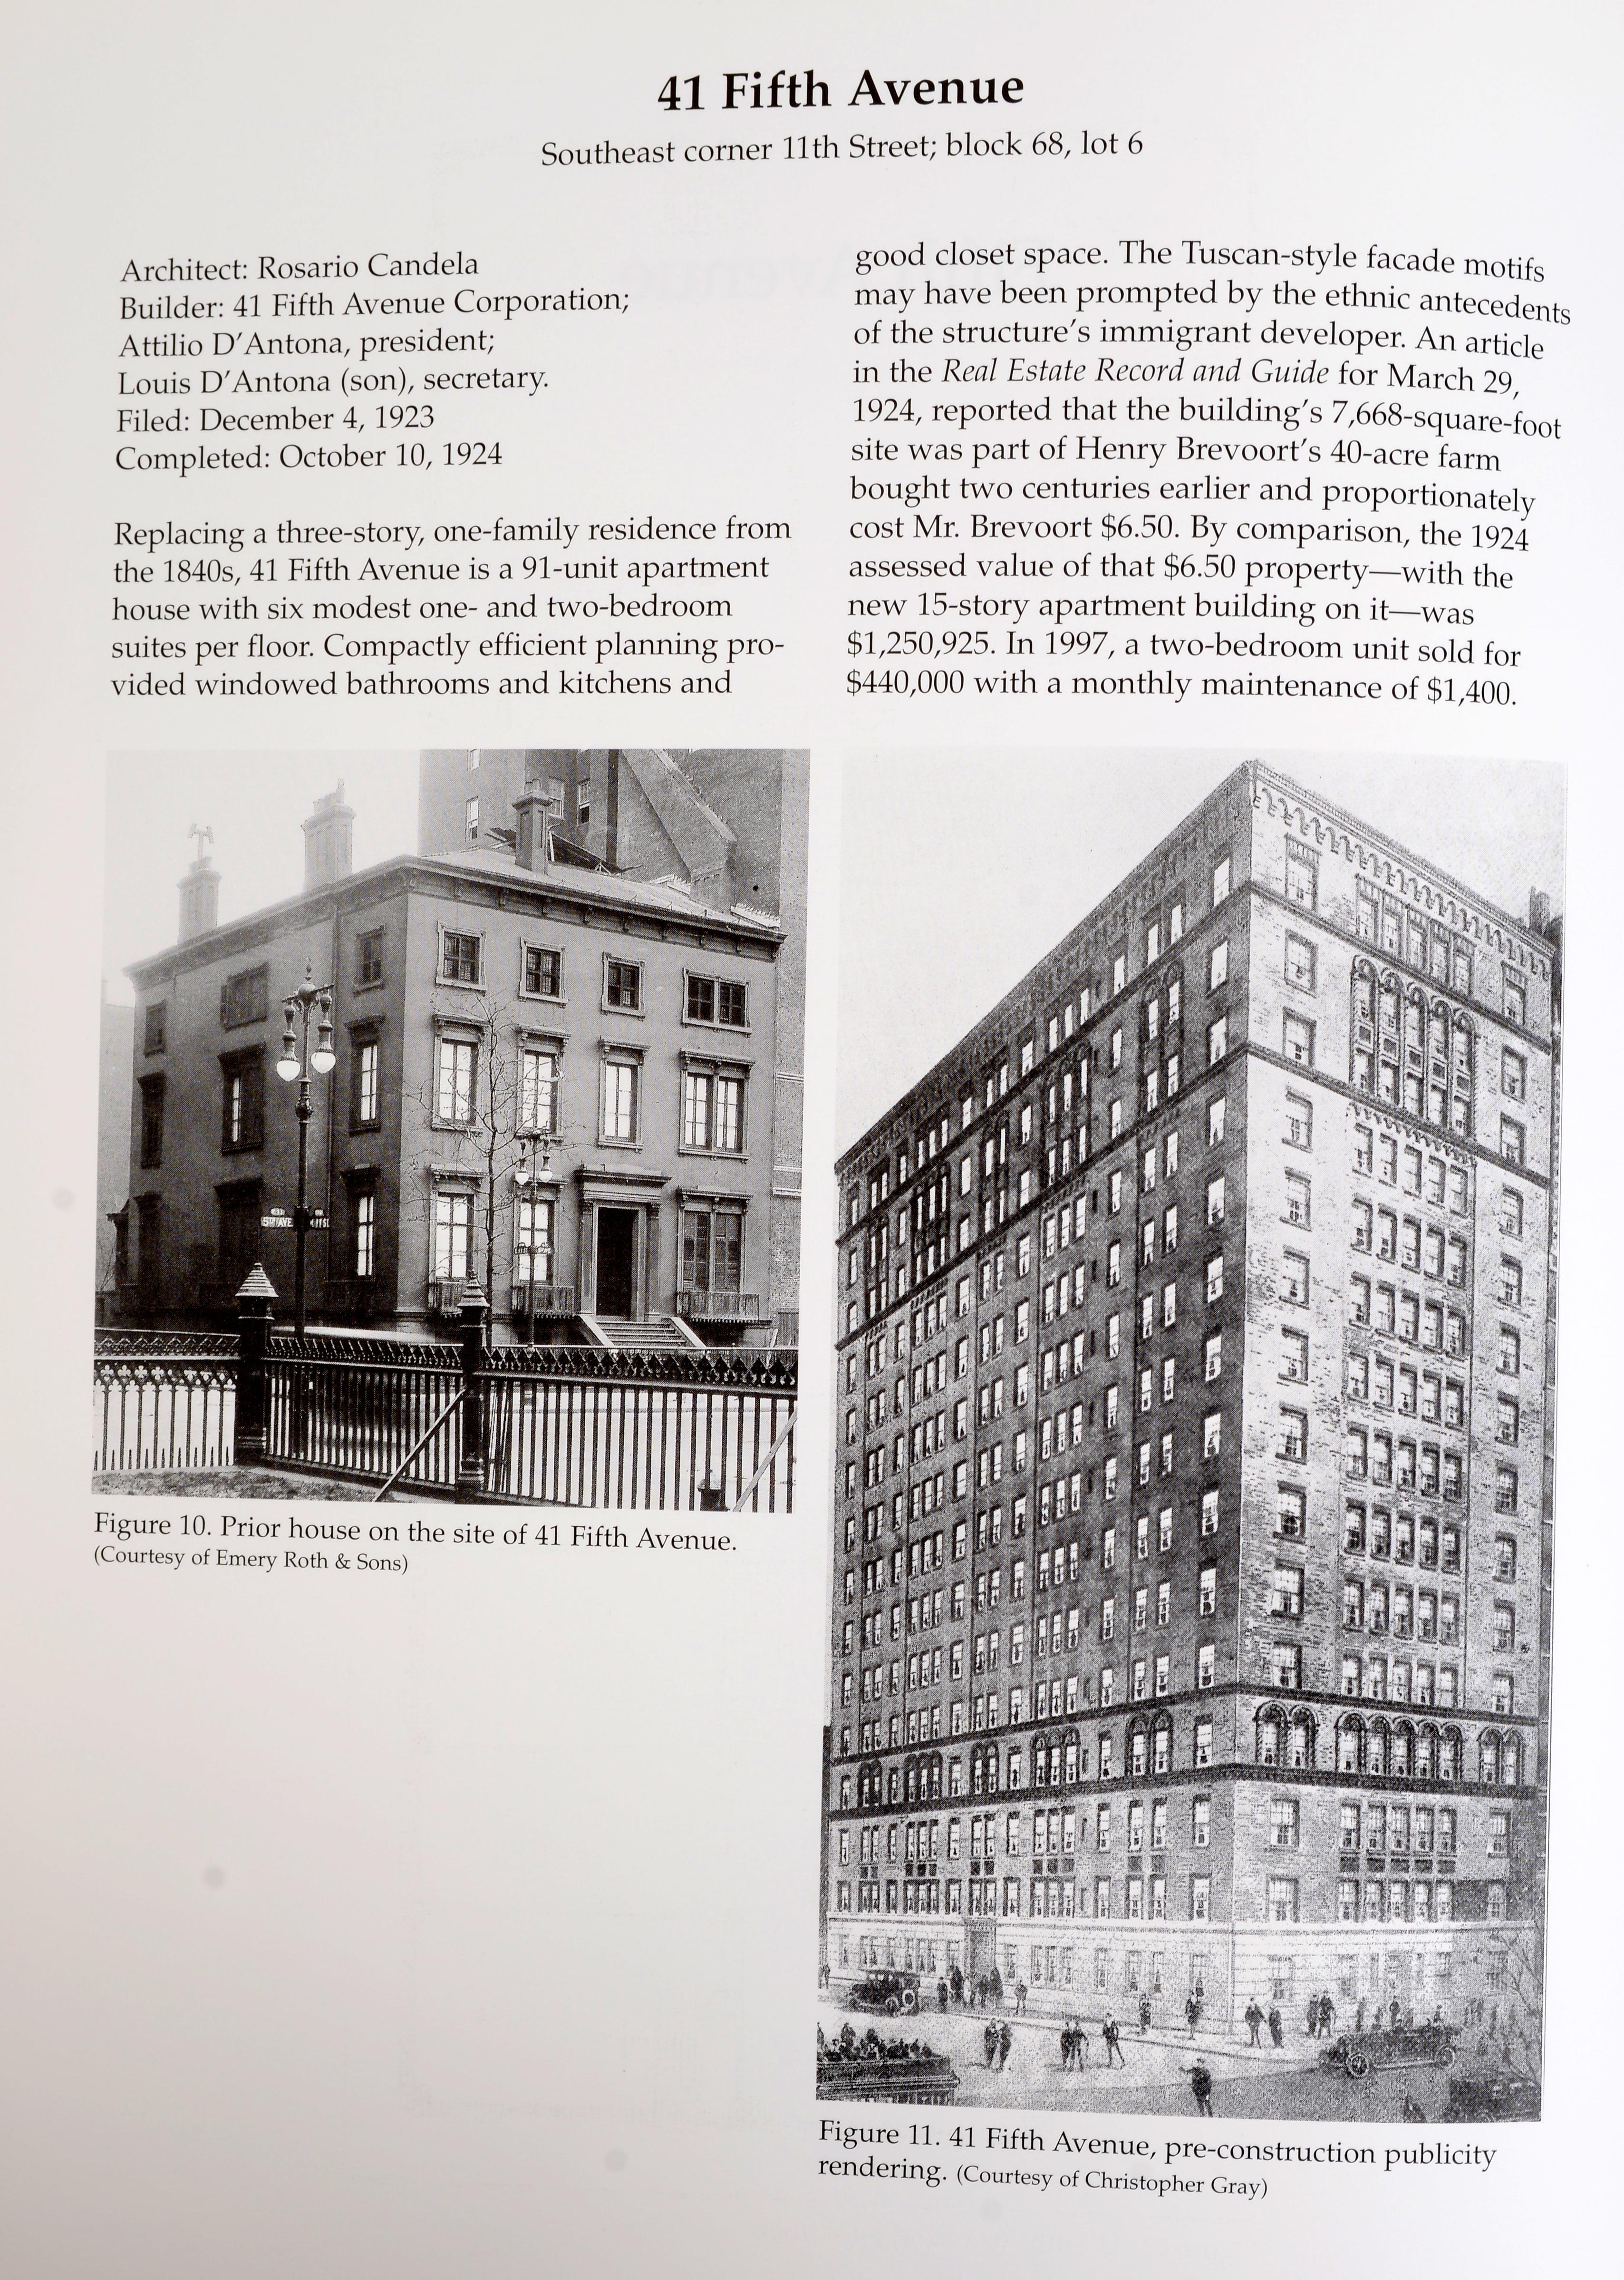 The New York Apartment Houses of Rosario Candela and James Carpenter: A Descriptive Catalogue, by Andrew Alpern. New York, Acanthus Press 2001. 1st Ed hardcover with dust jacket. The supreme addresses of choice in New York are on Park Avenue and